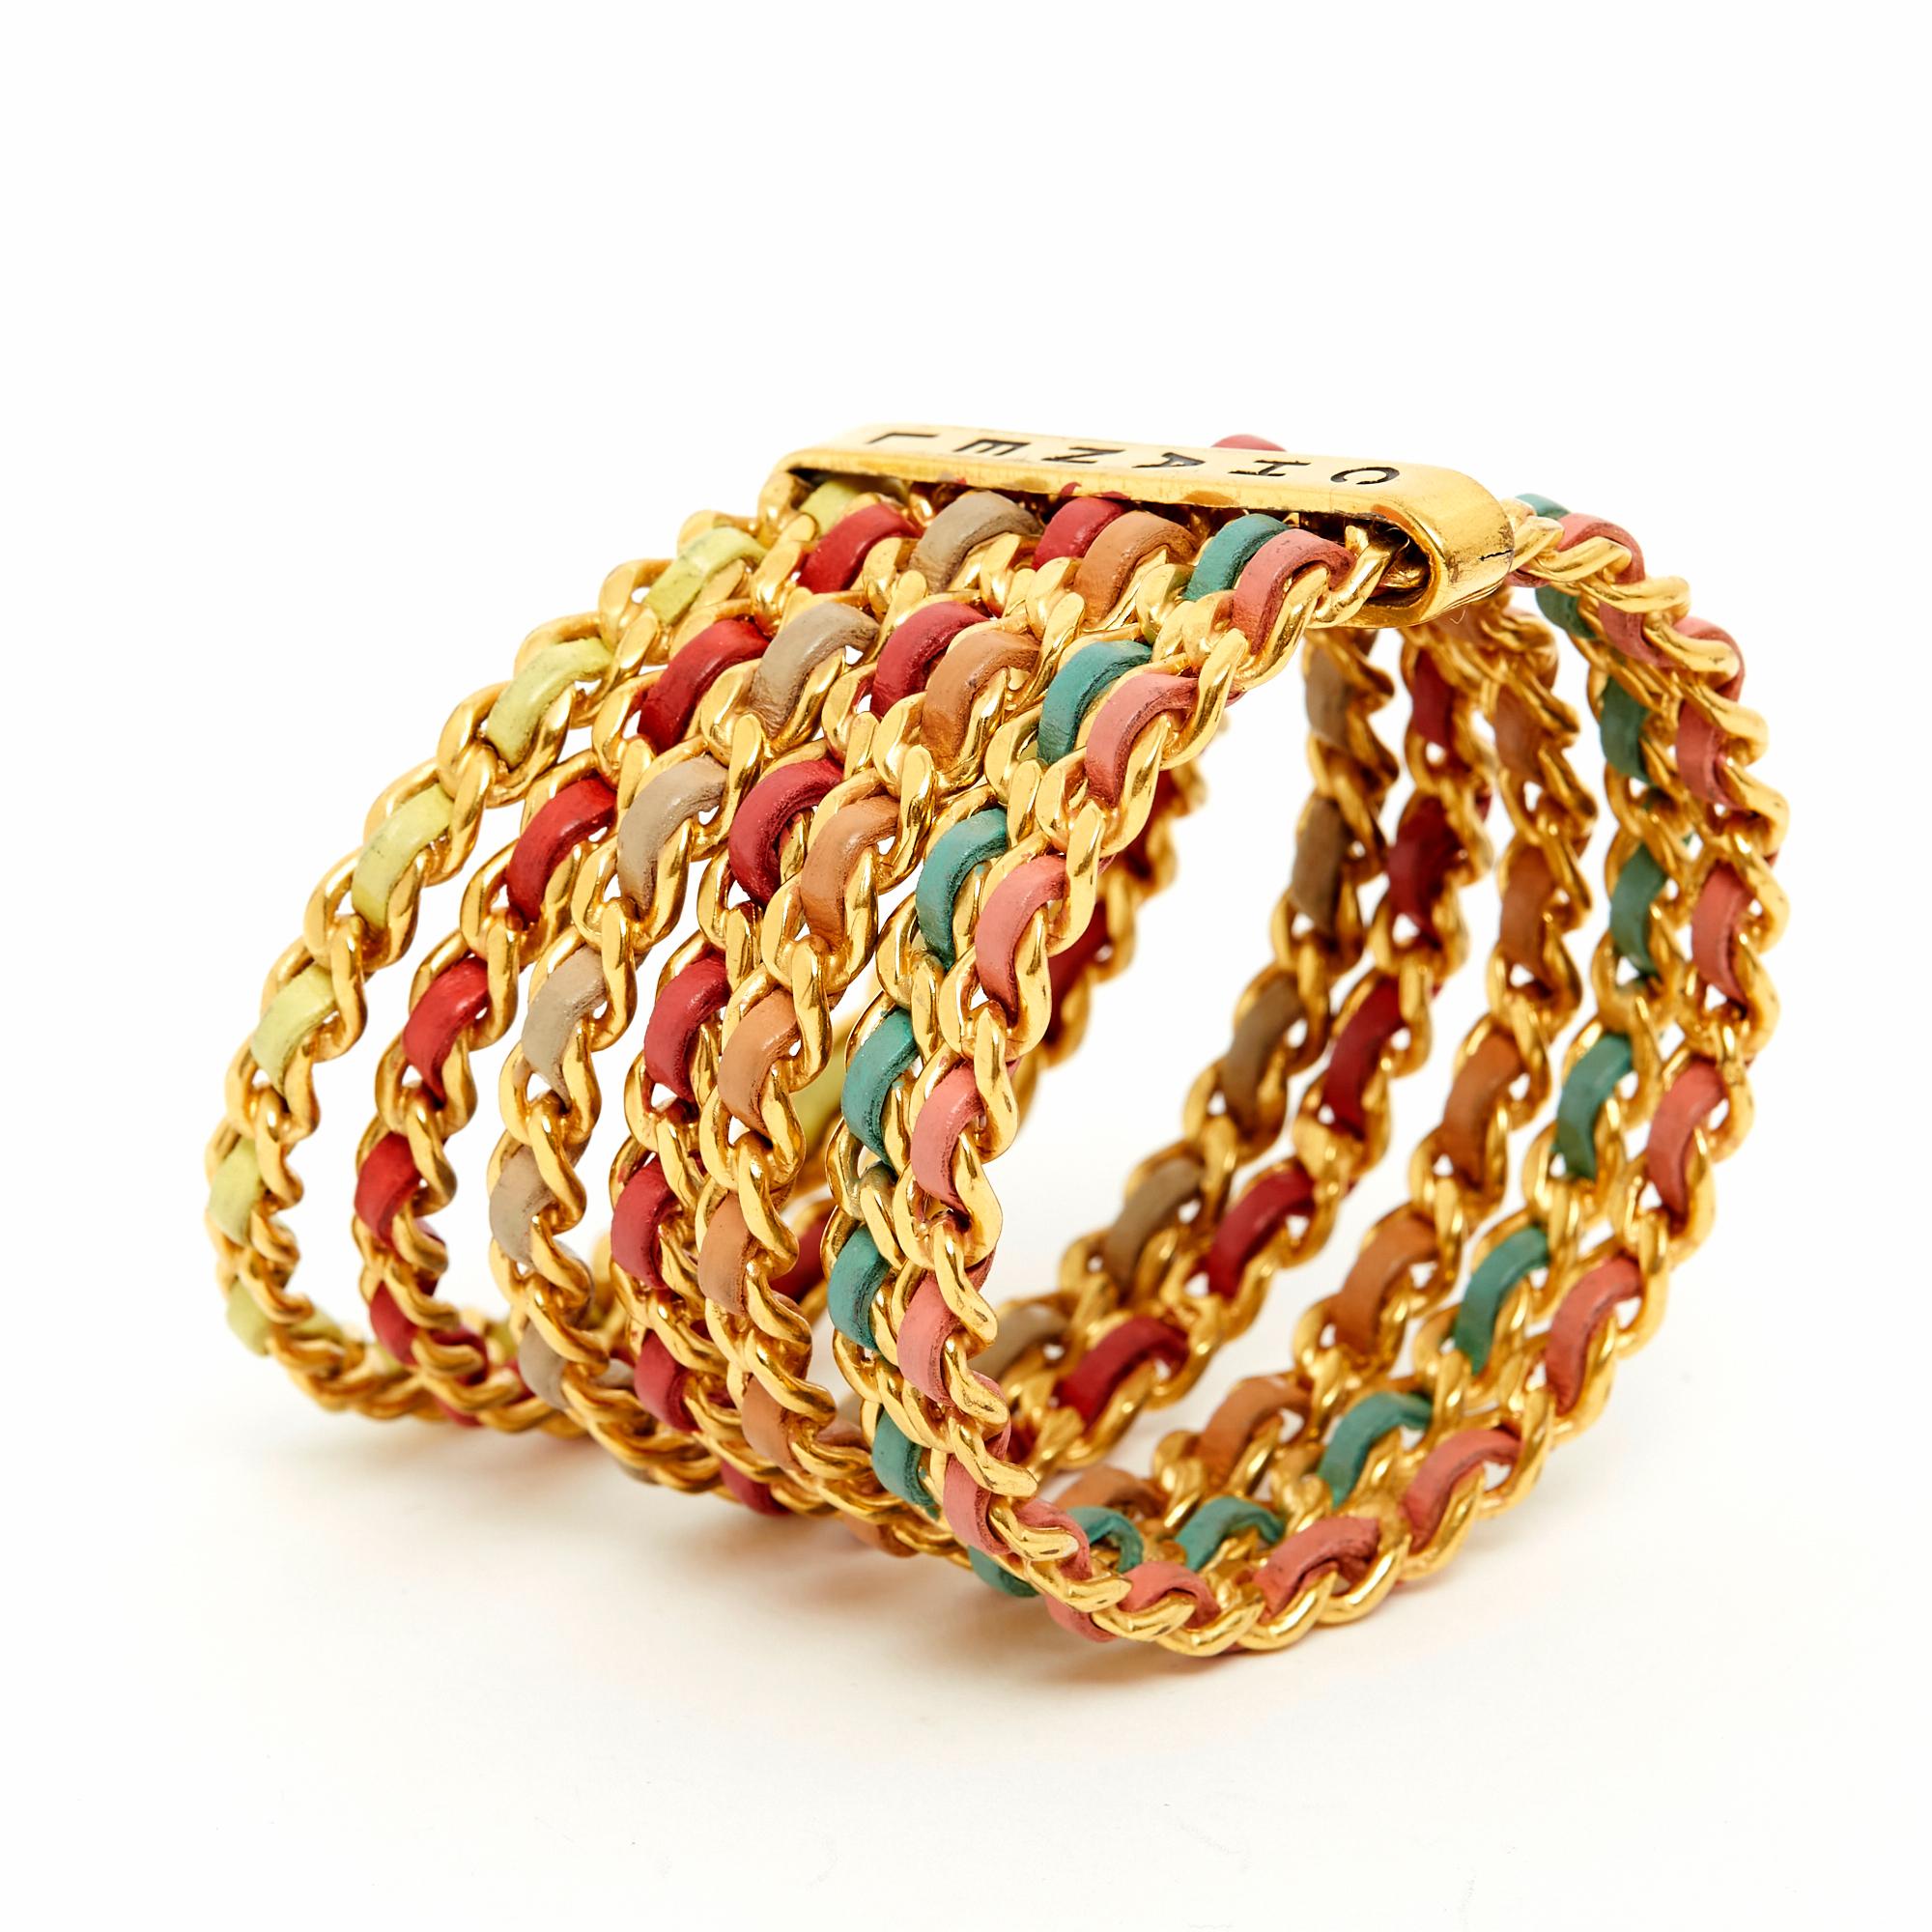 Chanel bracelet from the 1993 Cruise collection composed of 7 bracelets in a rigid gold metal chain interwoven with leather in different pastel colors, held together by a Chanel-engraved metal band. Inner diameter of the bracelets approximately 7